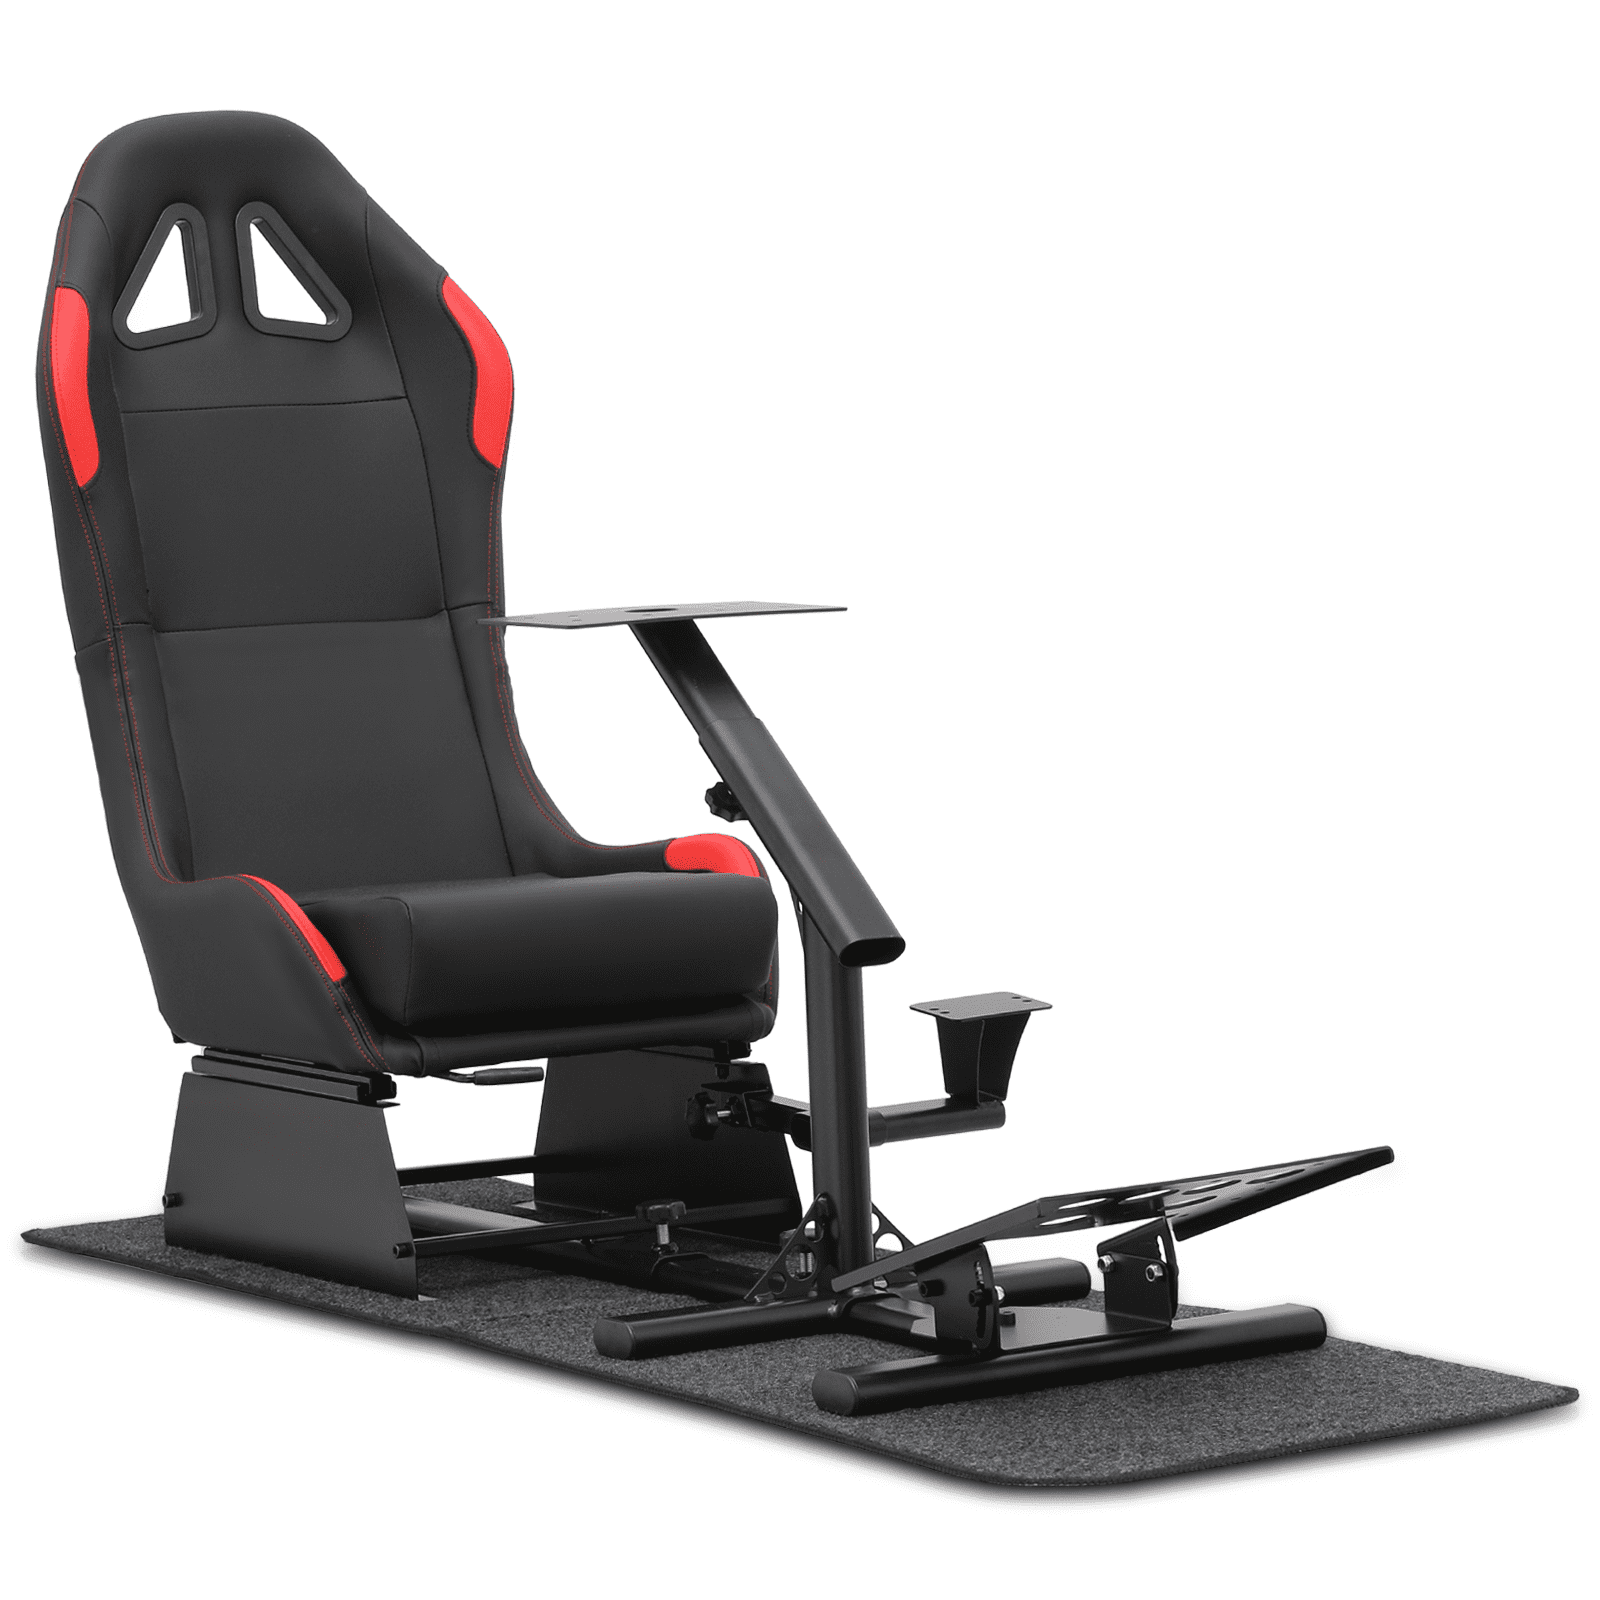 SEEUTEK Luyster Race Simulator Cockpit for Logitech G25, G27, G29 Height  Adjust Race Wheel Stand, Wheel and Pedals Not Included BZ-1022-84 - The  Home Depot